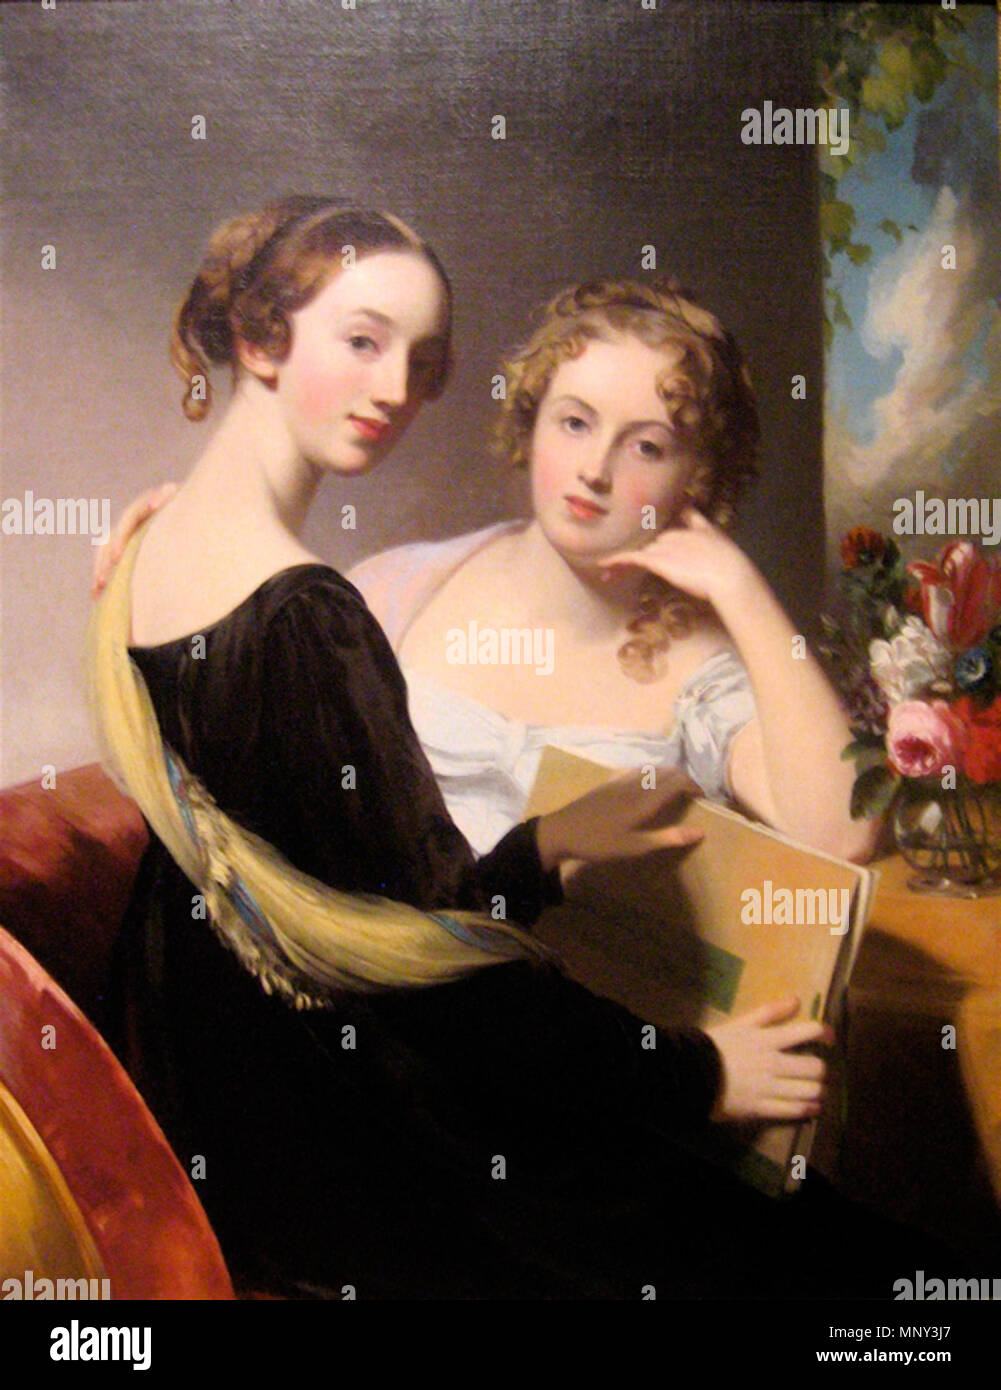 English: Portrait of the Misses Mary and Emily McEuen .  Thomas Sully (England, Horncastle, 1783 - 1872) Portrait of the Misses Mary and Emily McEuen, 1823 Painting, Oil on canvas, 44 1/4 x 34 1/4 in. (112.4 x 87 cm); Framed: 55 x 45 x 4 1/2 in. (139.7 x 114.3 x 11.43 cm) Gift of Jo Ann and Julian Ganz, Jr. in honor of the museum's 40th anniversary (M.2008.222) Wikipedia Loves Art at the Los Angeles County Museum of Art This photo of item # M.2008.222 at the Los Angeles County Museum of Art was contributed under the team name 'artifacts' as part of the Wikipedia Loves Art project in February 2 Stock Photo